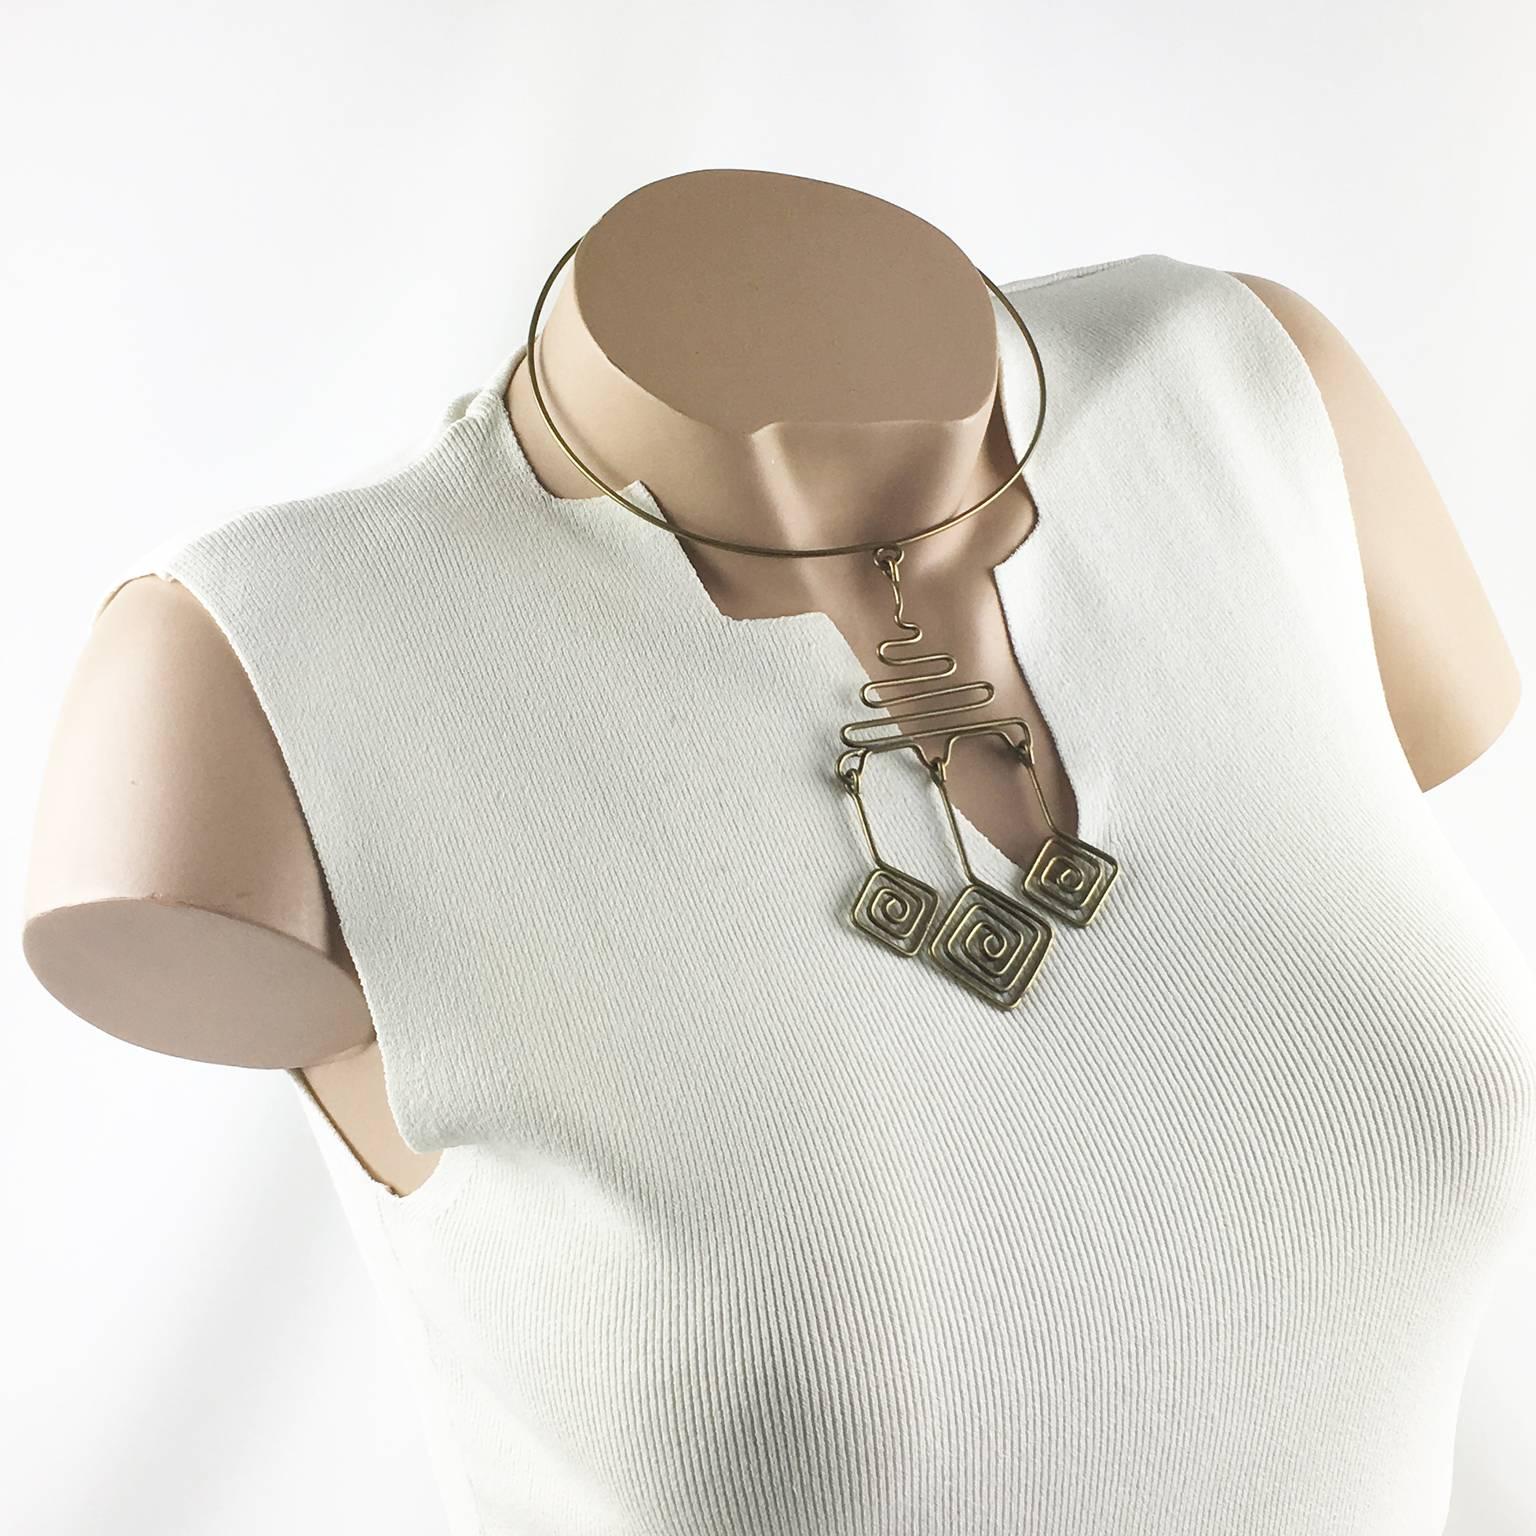 Lovely Mid Century modernist Space Age dog collar necklace with geometric pendant. Featuring a brass rigid neck band, ornate with a geometric pendant with dangling charms, in brass wire. No visible marking. 
Measurements: neck band circumference is